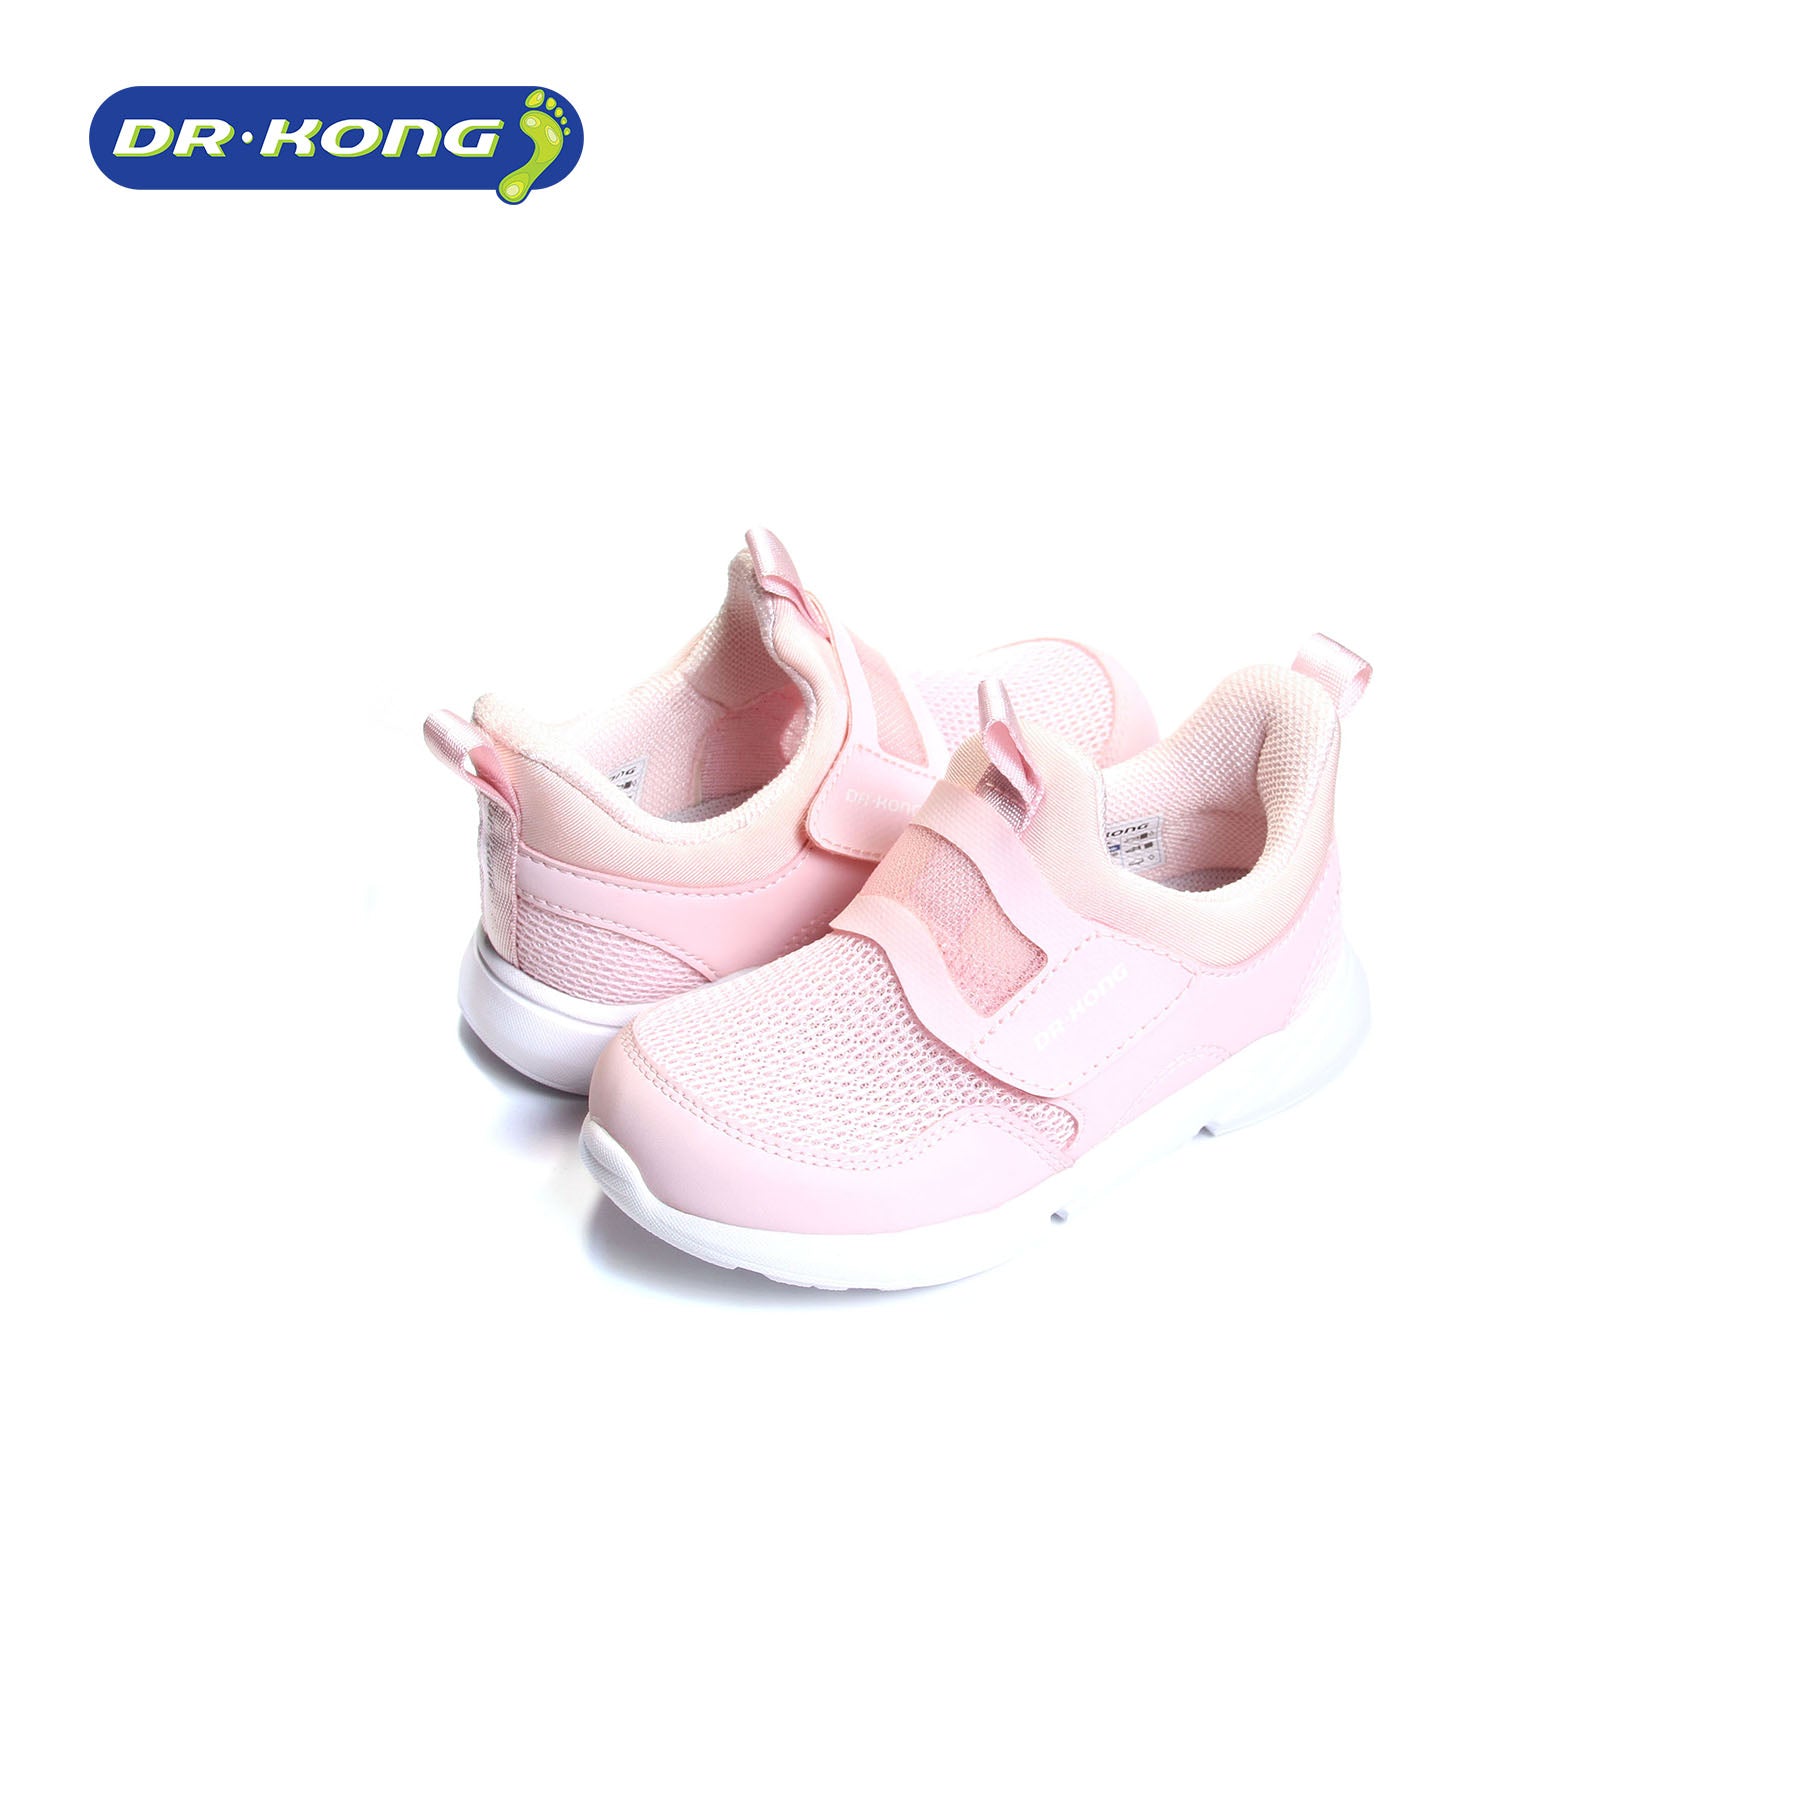 Dr. Kong Baby 123 Rubber Shoes B1400564